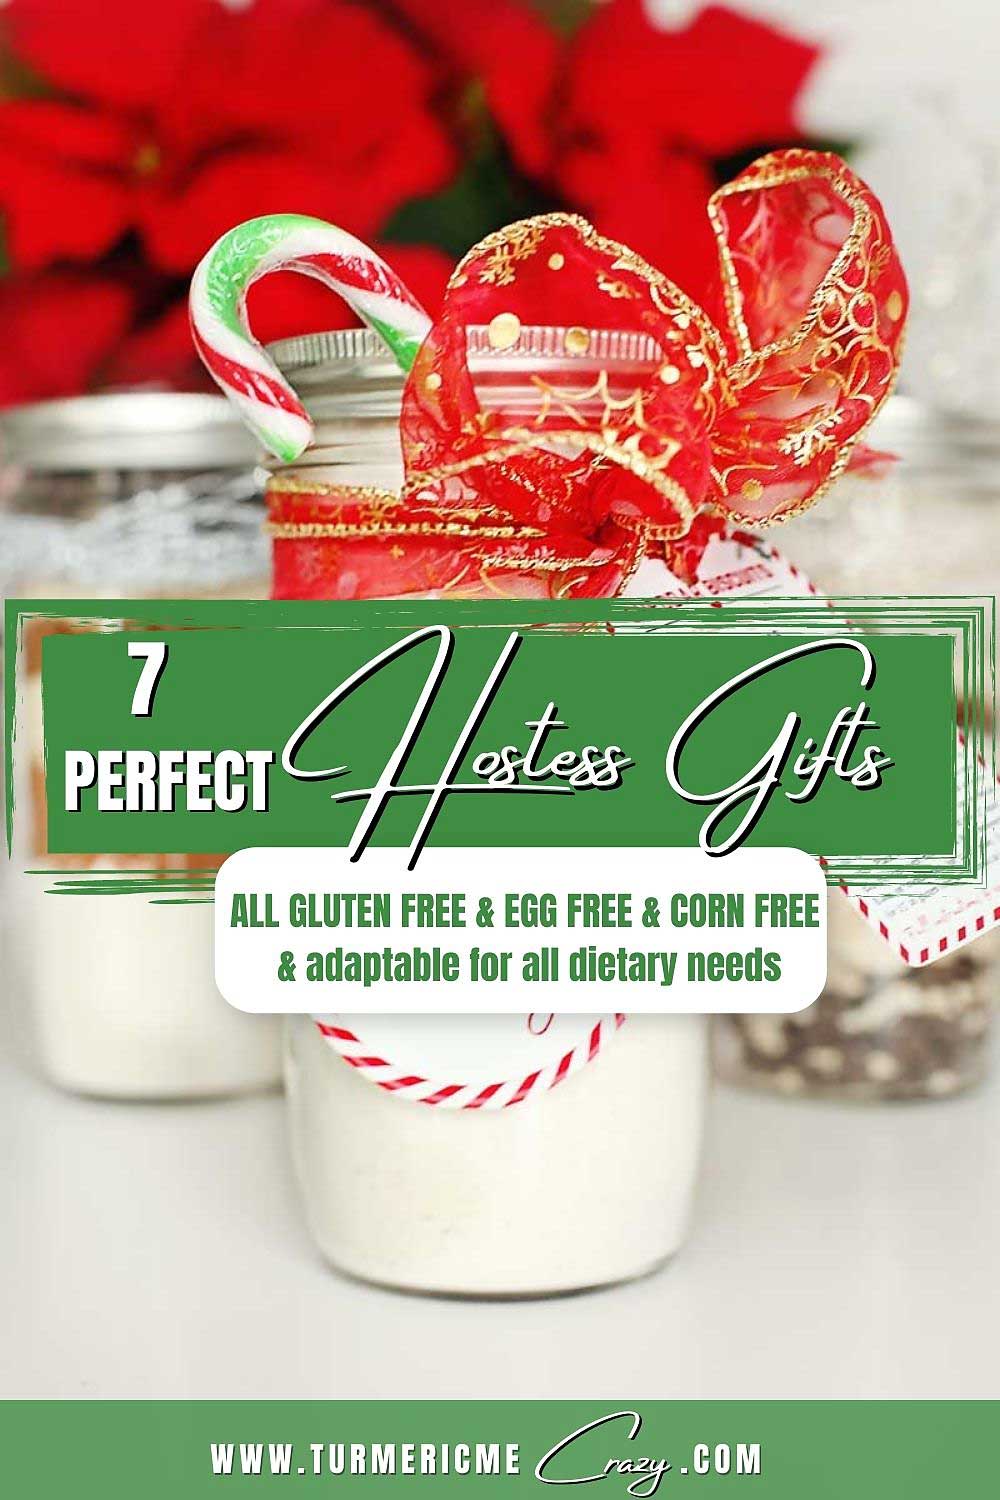 Quick & easy hostess gift ideas made in 15 mins or less! No matter what your hostess dietary needs, bring the perfect holiday gift! Your host and or hostess will be ever so grateful for you thoughtfulness in considering their dietary needs! Not only are these gifts thoughtful, they will make delicious treats & are quick & easy to make in under 15 mins! holiday gift ideas, Christmas gift ideas, hostess gift ideas, mason jar gifts